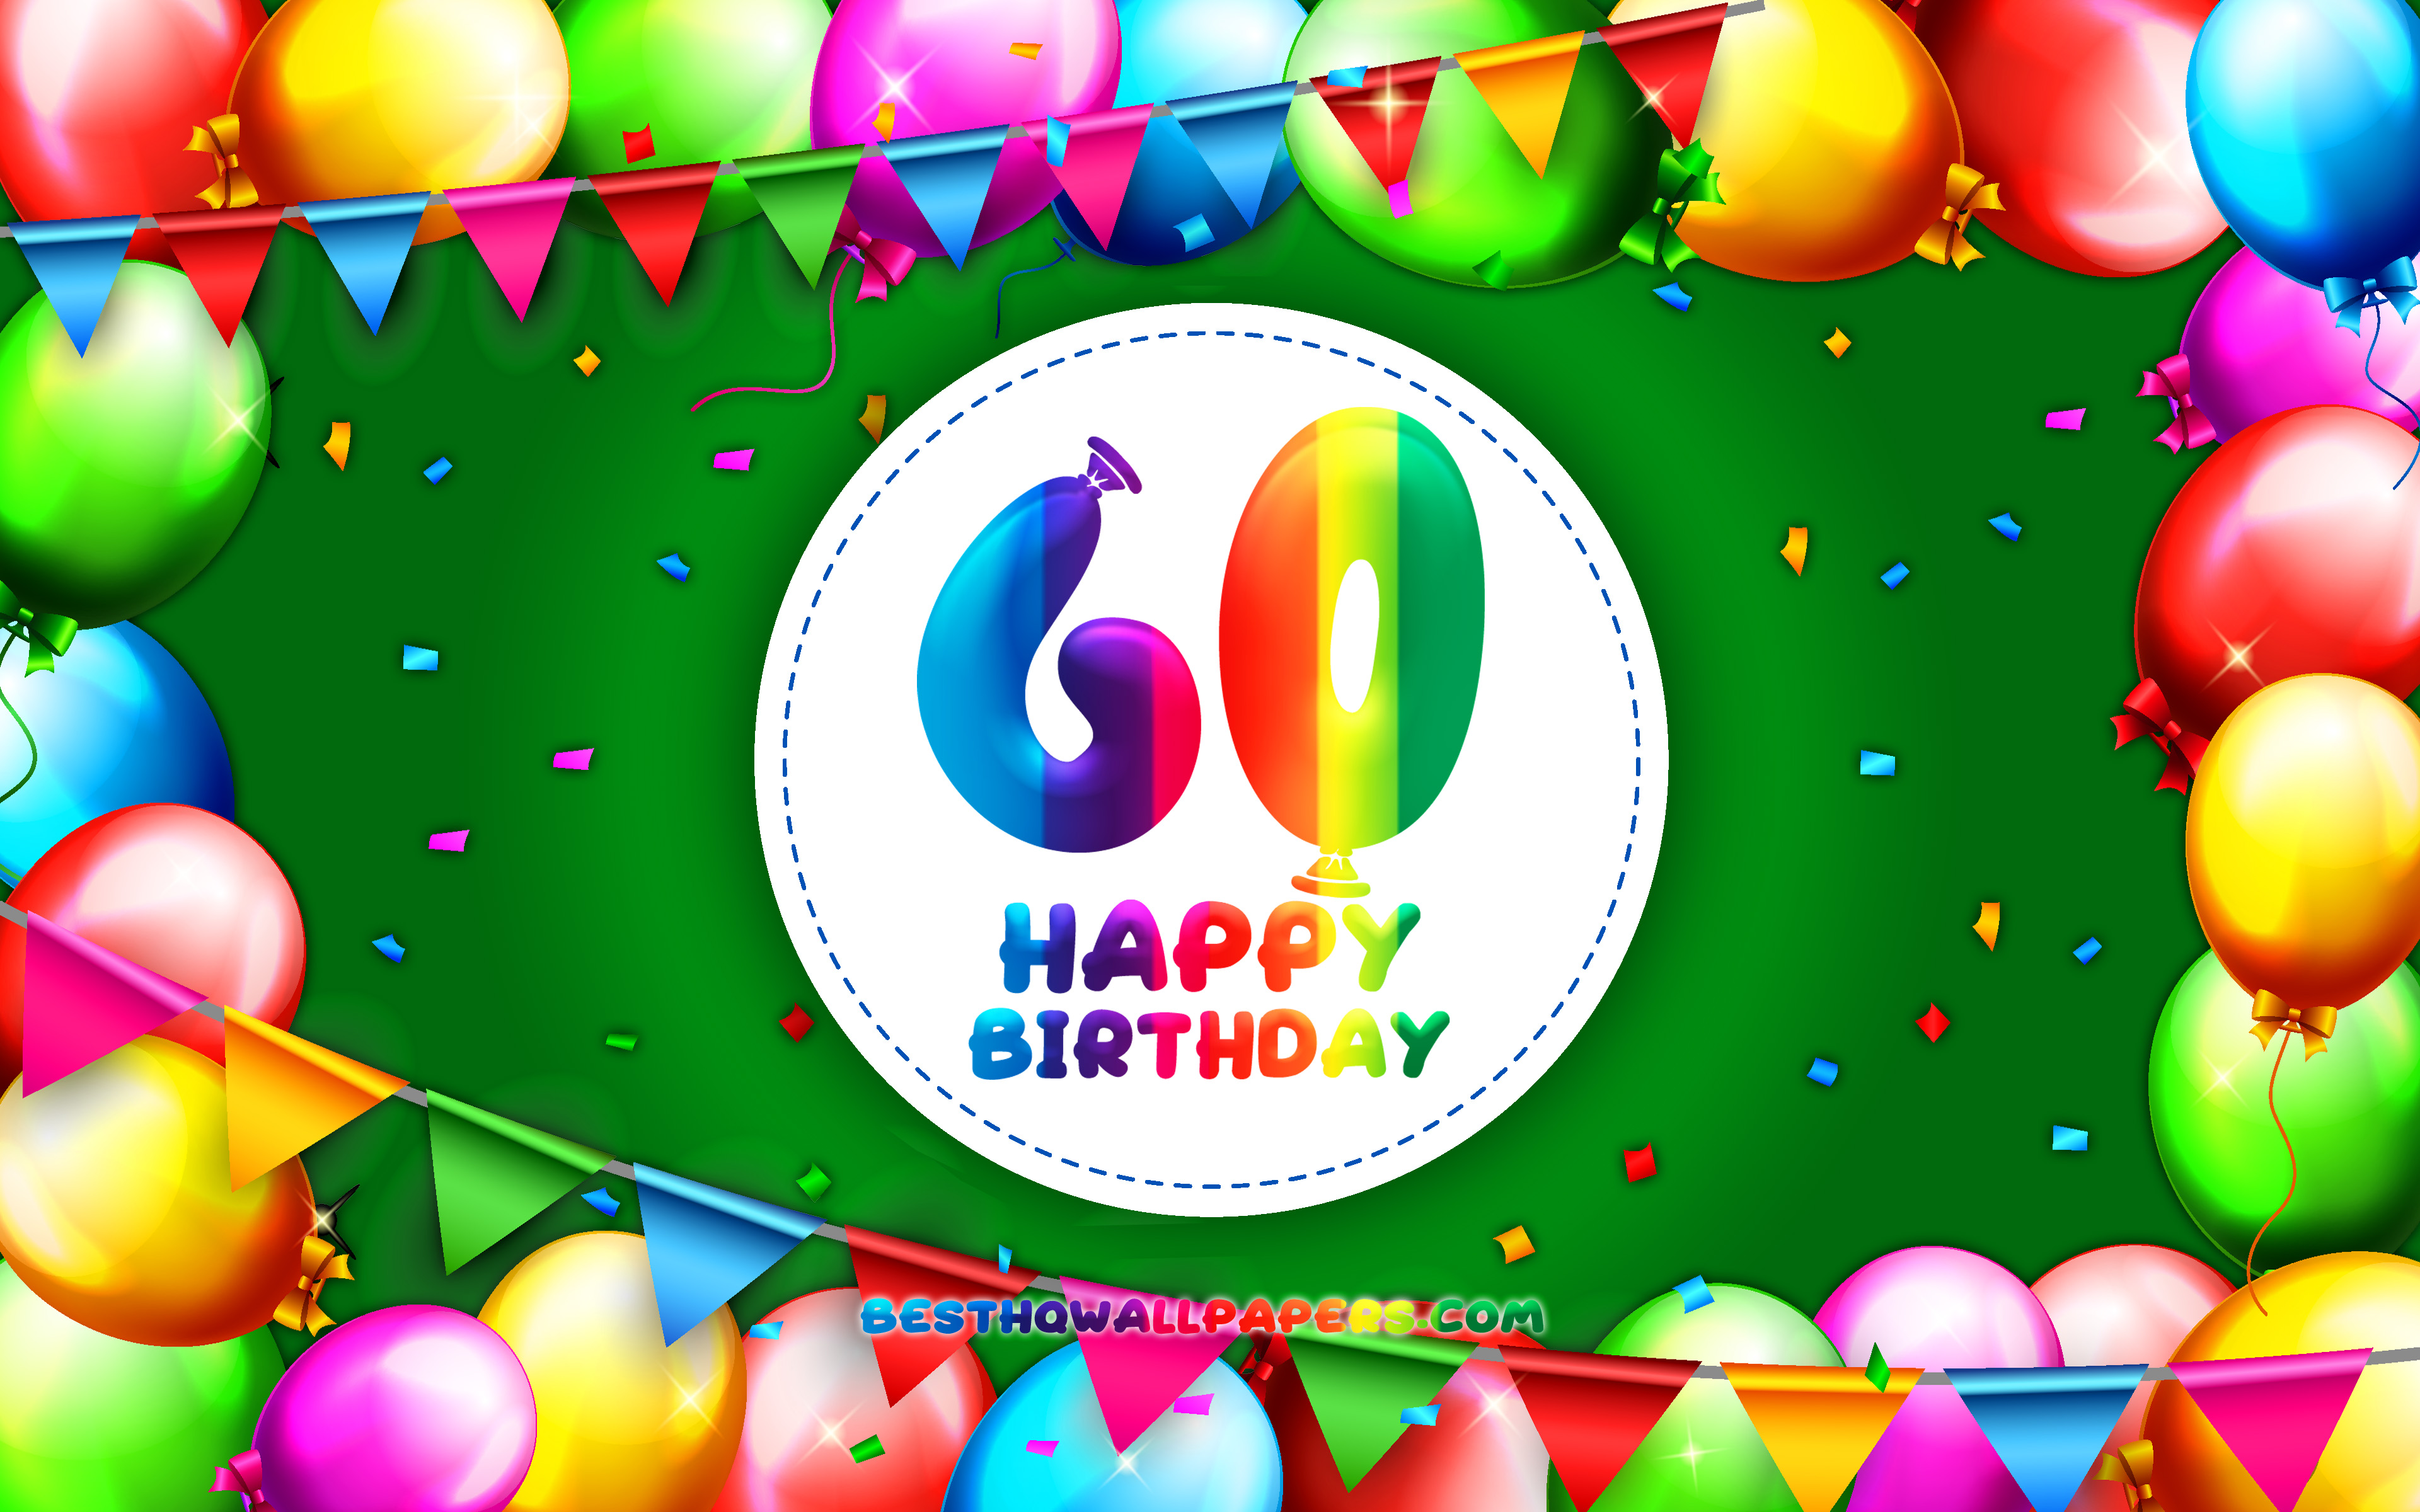 Download wallpaper Happy 60th birthday, 4k, colorful balloon frame, Birthday Party, green background, Happy 60 Years Birthday, creative, 60th Birthday, Birthday concept, 60th Birthday Party for desktop with resolution 3840x2400. High Quality